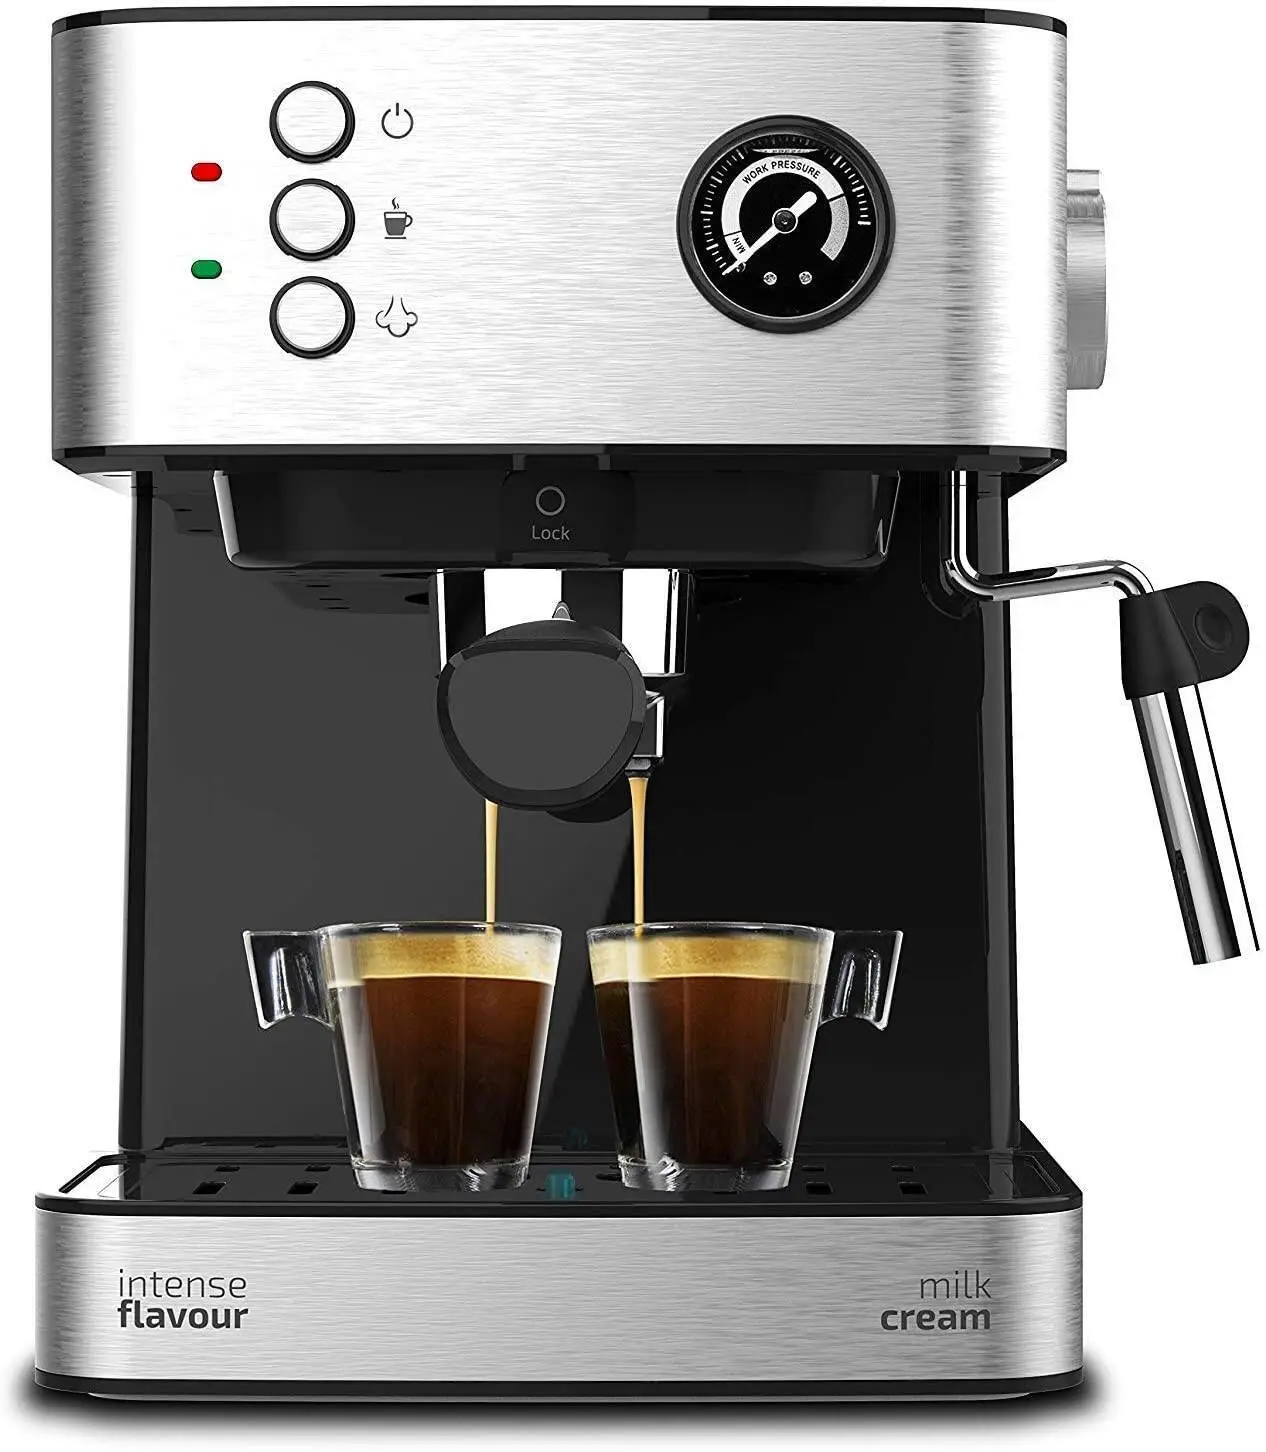 Manual Express Coffee Maker Power Espresso 20. 850 W, Pressure 20 Bars, 1.6L Tank, Double Outlet Arm, Steamer, Cup Warmer Surface, Stainless Steel Finishes